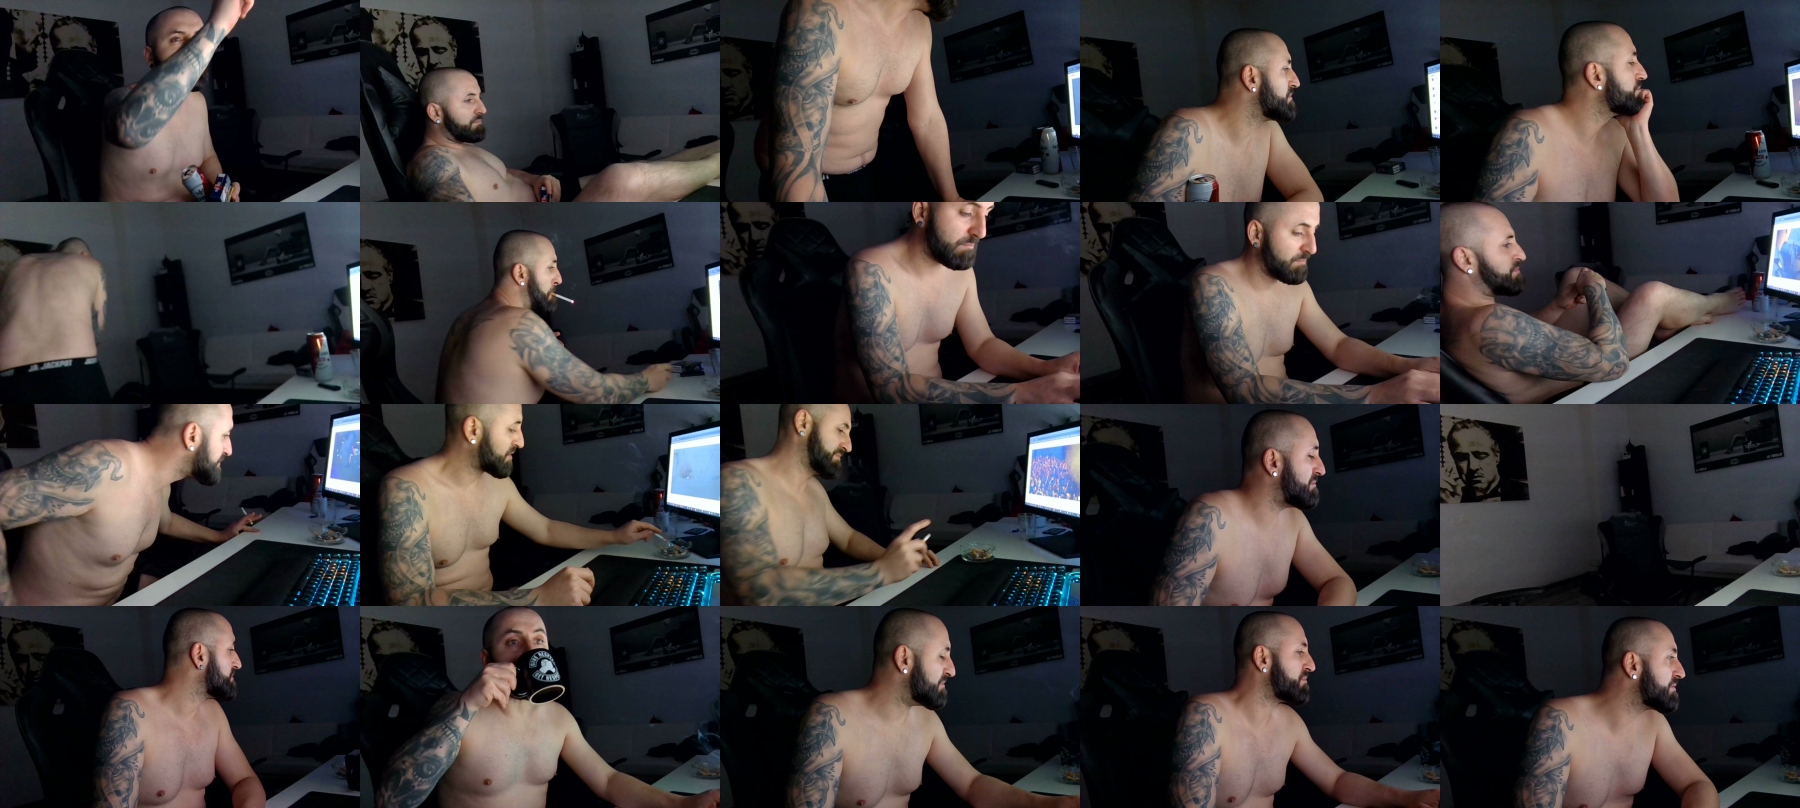 fips1981_sk Cam4 27-08-2021 Recorded Video Show